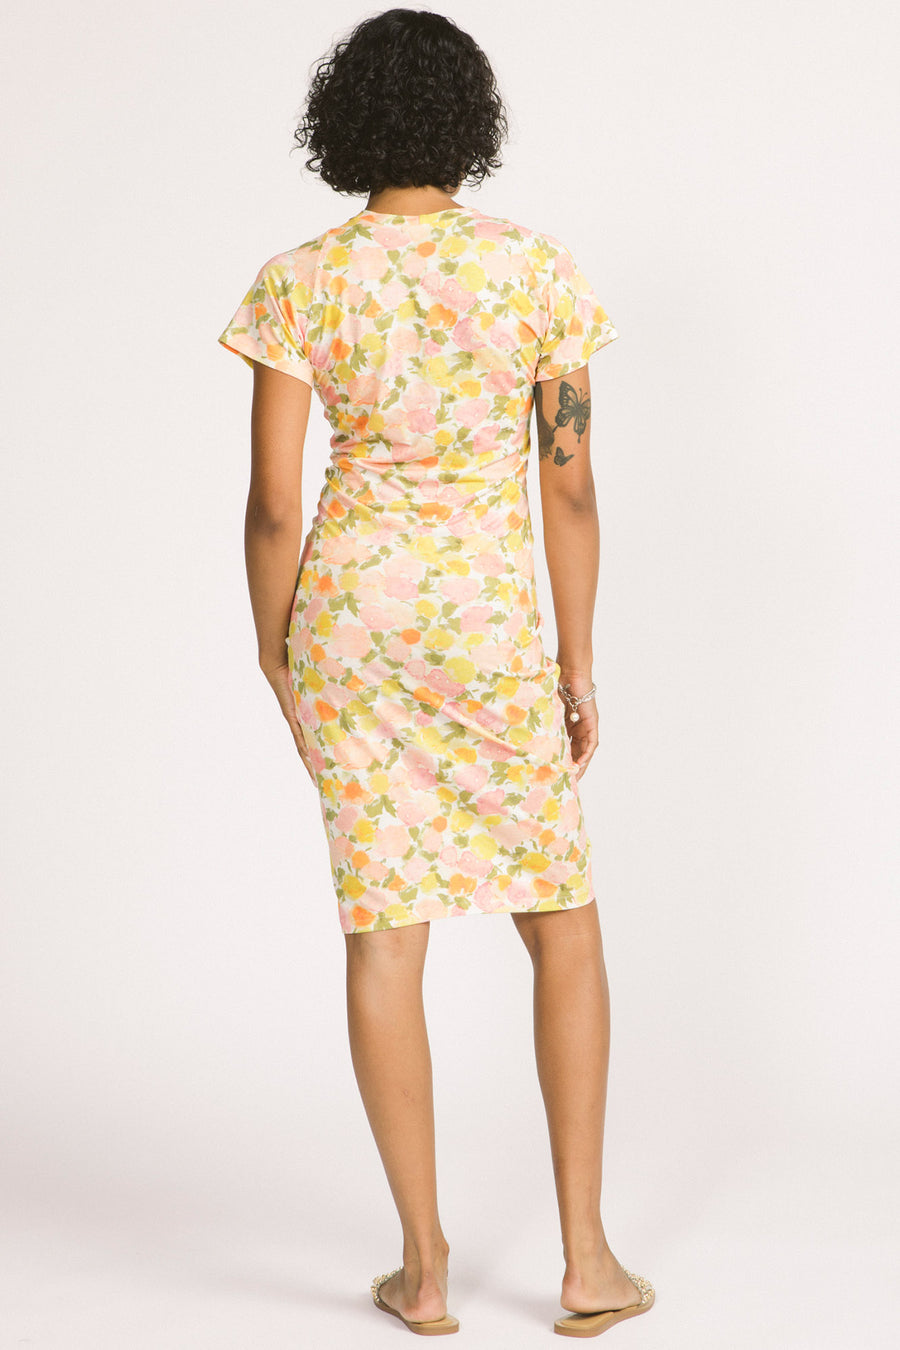 Back view of woman wearing yellow floral bodycon Jessamine dress by Allison Wonderland. 